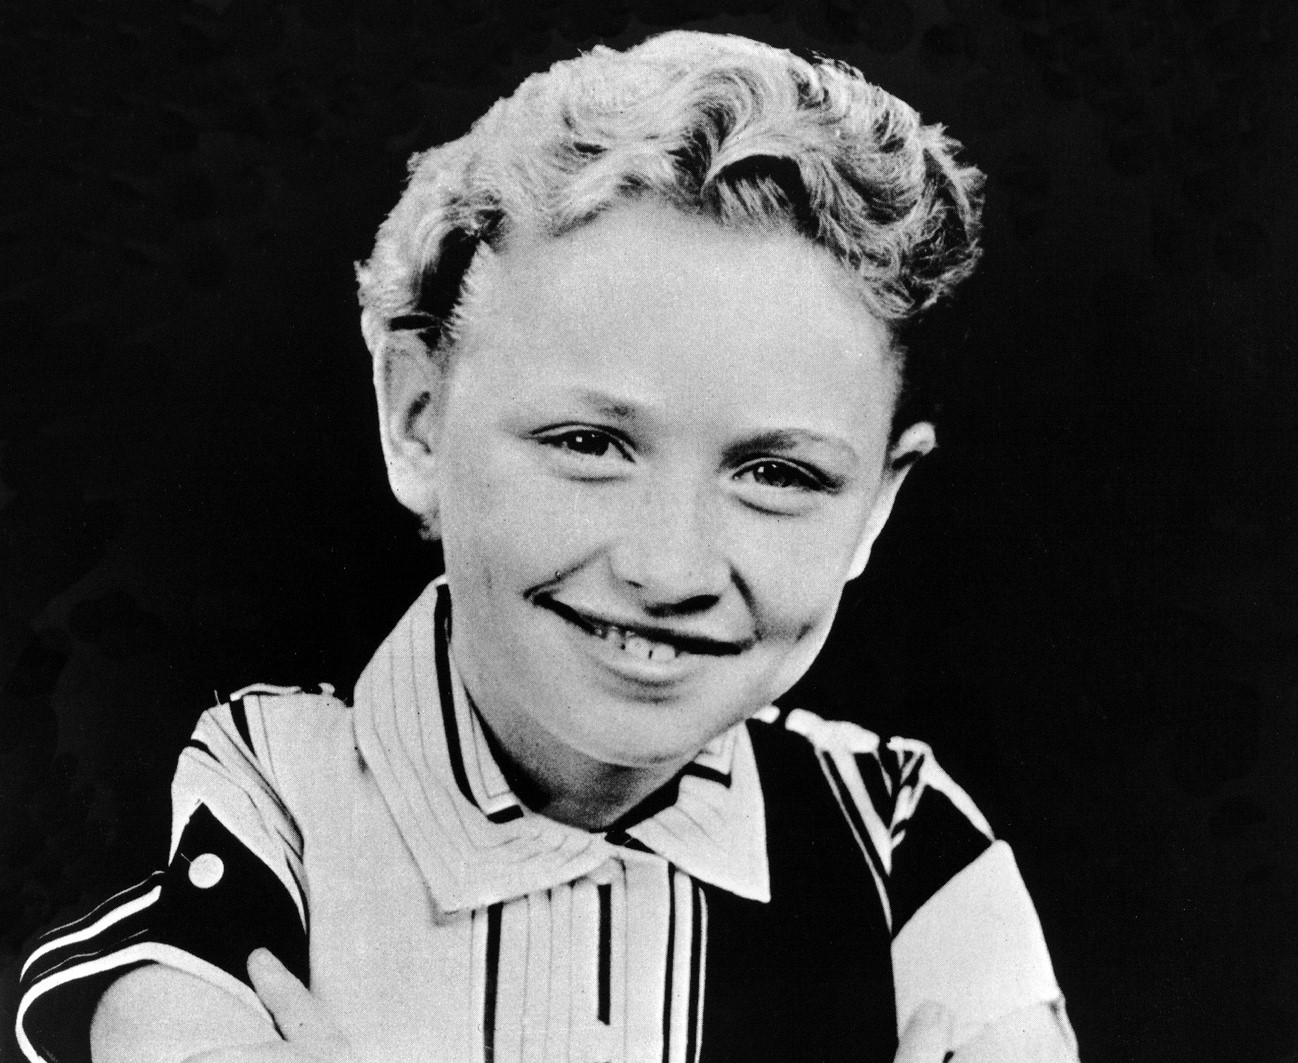 A black and white photo of Dolly Parton as a child sitting in front of a black background.